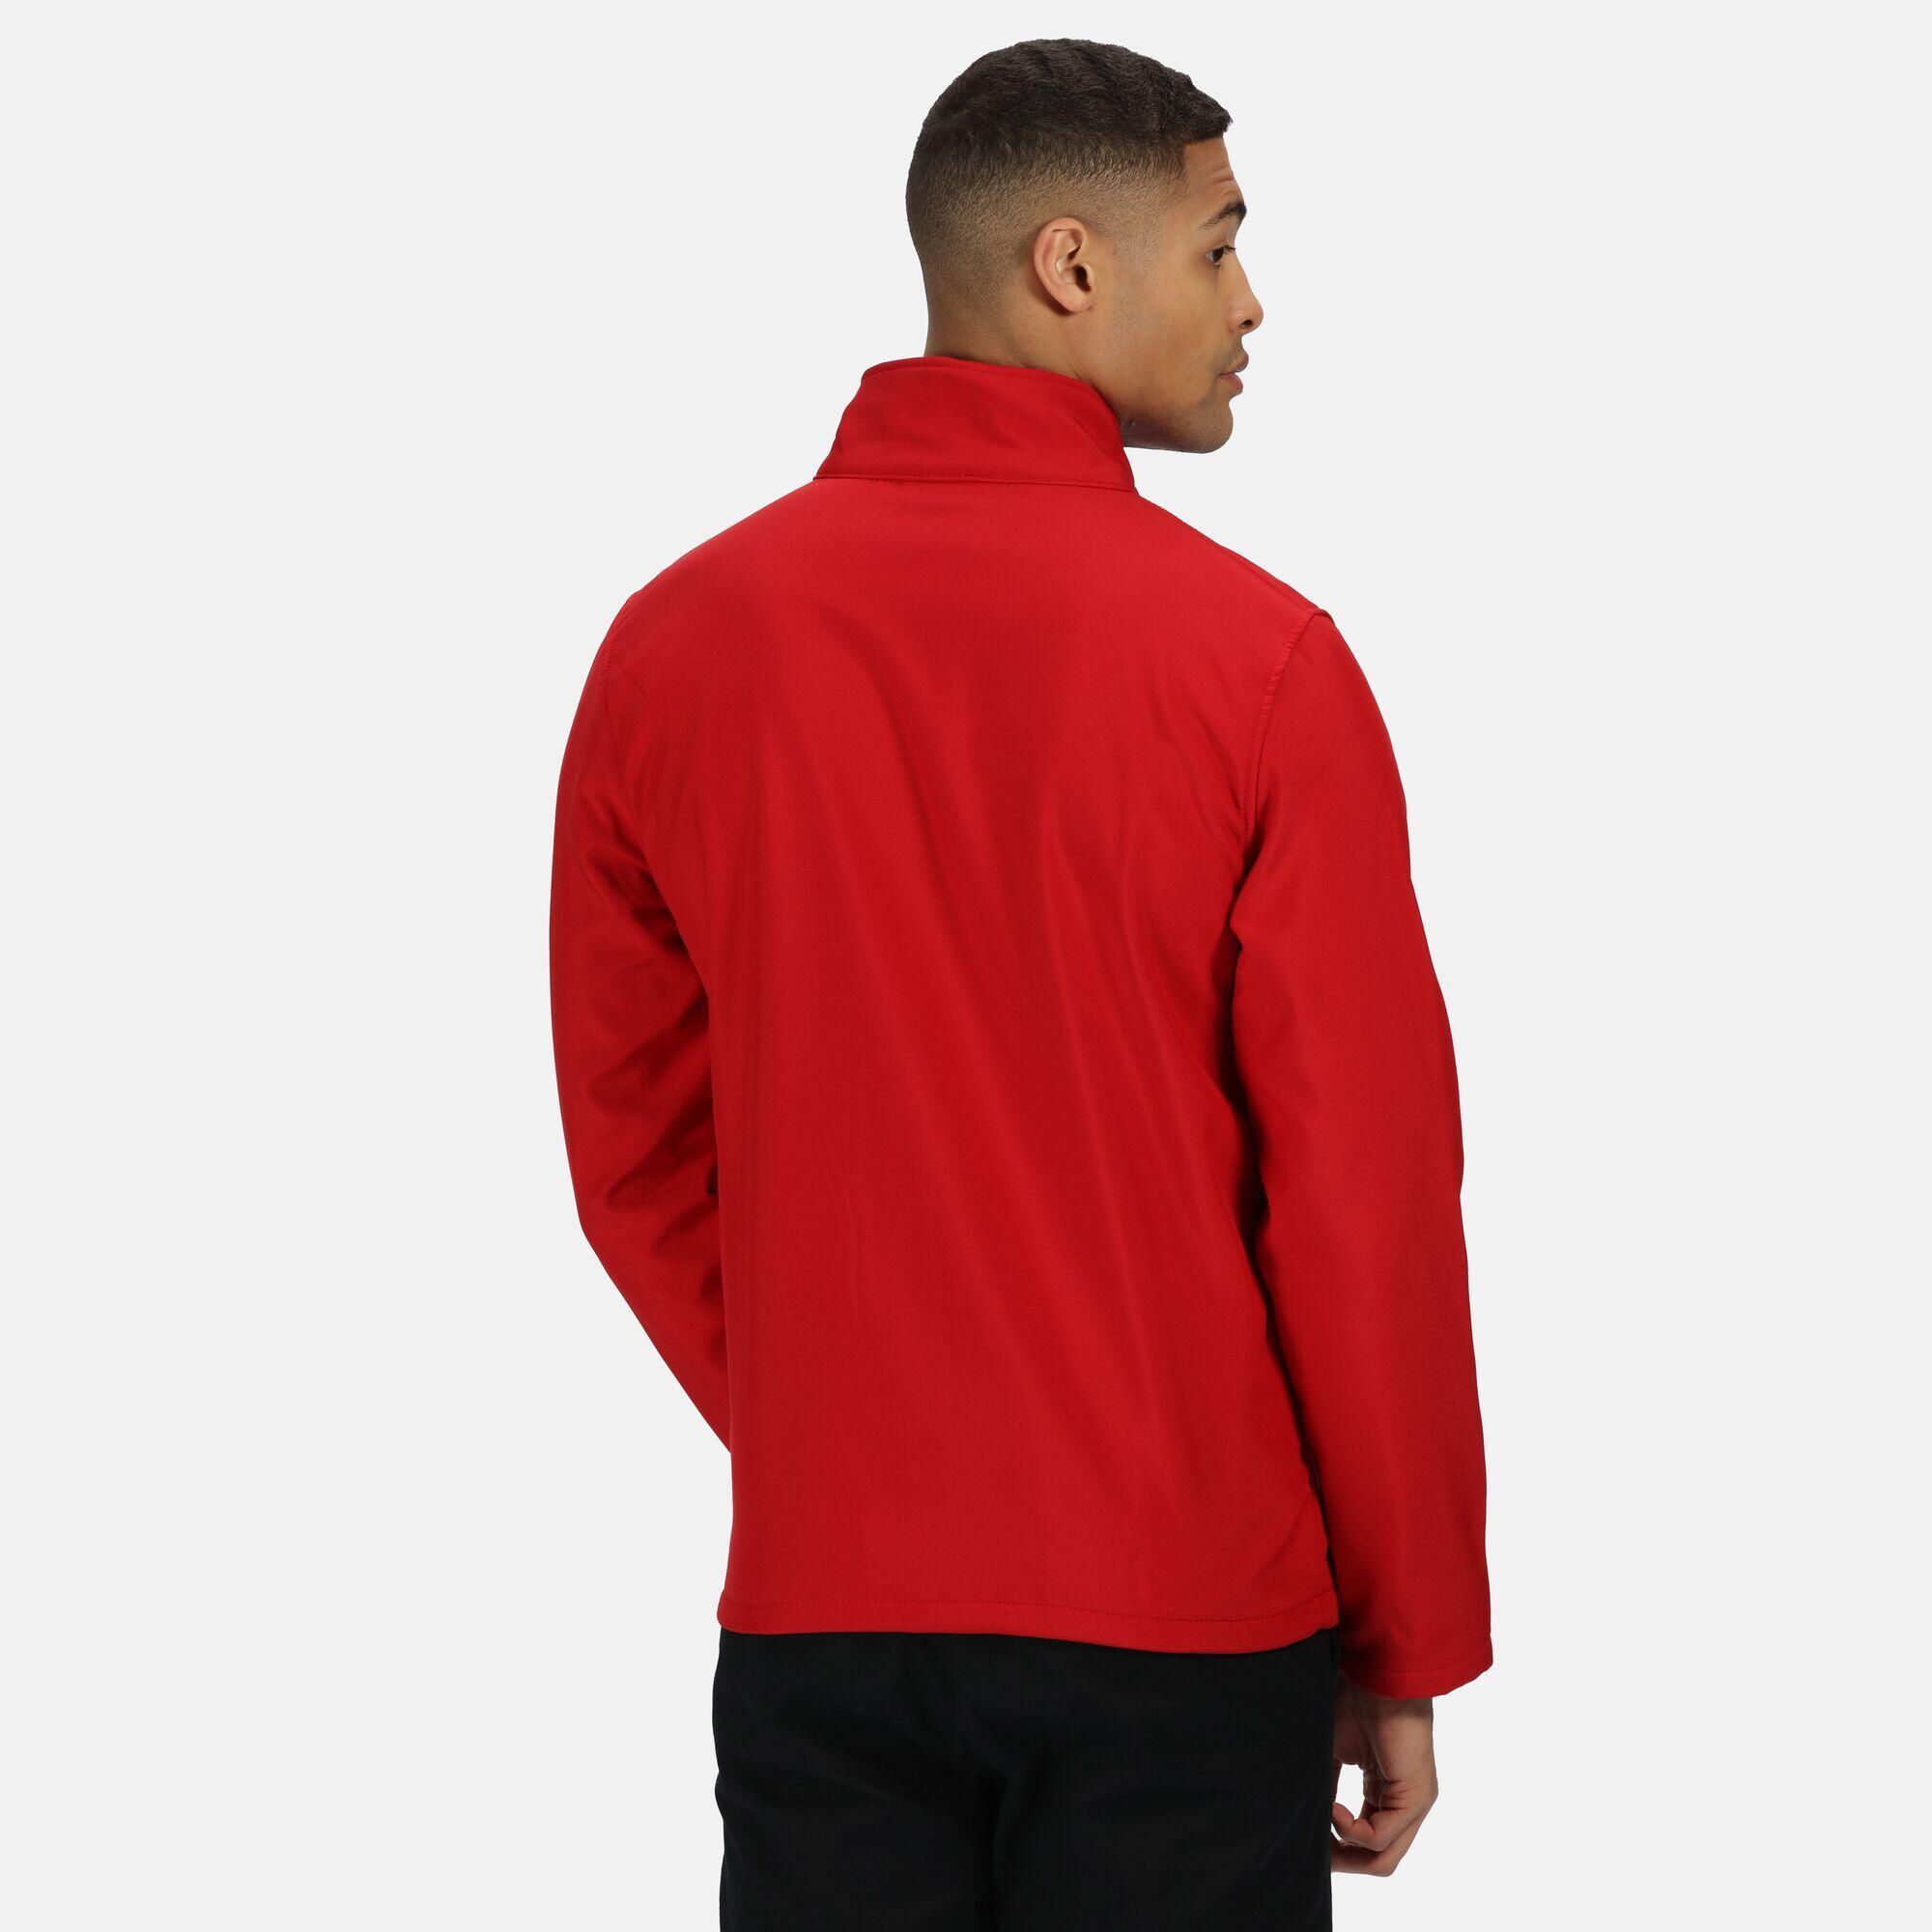 Standout Mens Ablaze Printable Soft Shell Jacket (Classic Red/Black) 4/5